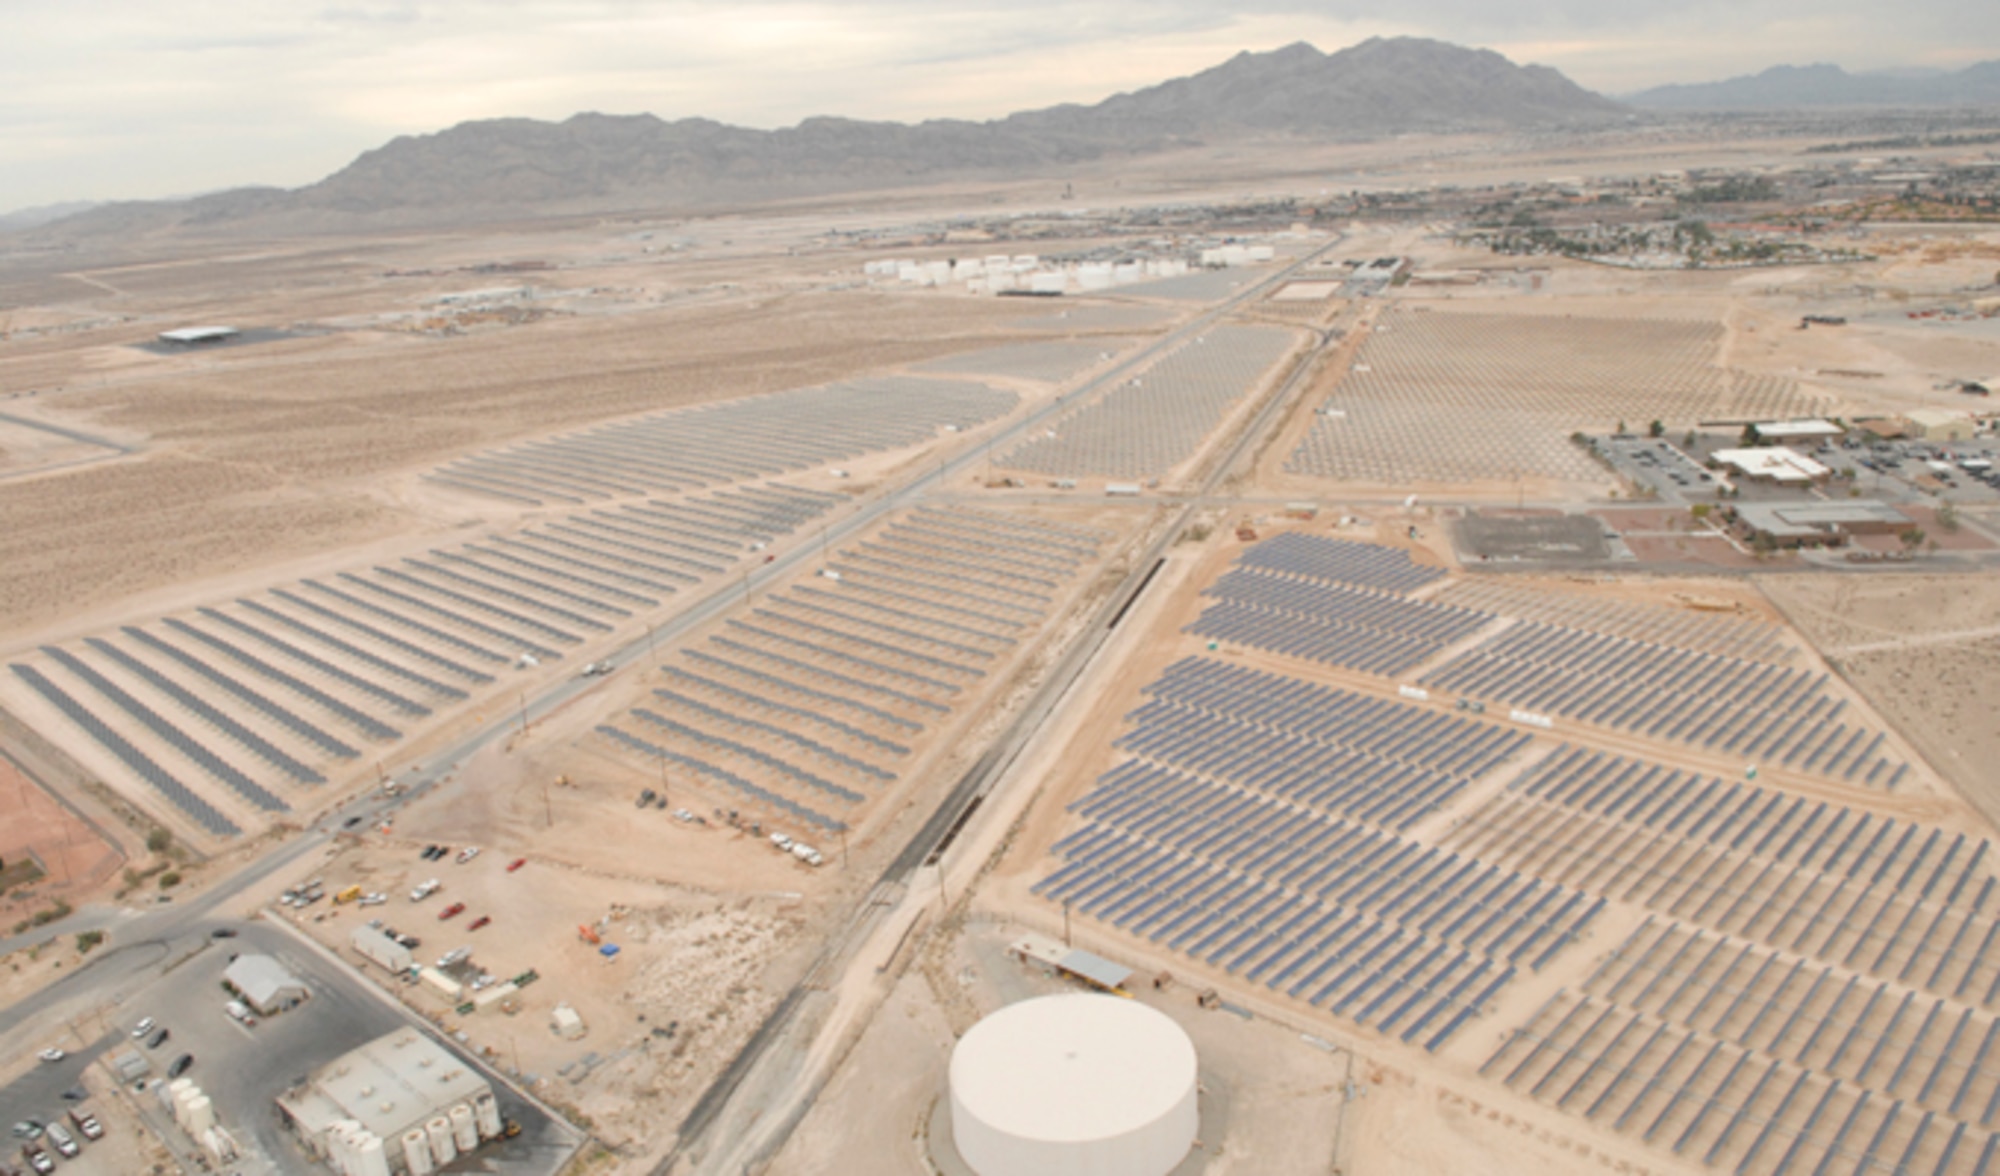 Nellis Air Force Base, Nev., plans to more than double its solar power production pictured here in 2007. Recently, Air Force officials signed a land lease with NV Energy, paving the way for construction of a 19-megawatt solar photovoltaic power system. NV Energy will provide a secondary substation and a transmission line as an in-kind consideration to the government for the lease. The substation will provide energy security and mission assurance by providing a redundant primary electric feed to the base. (U.S. Air Force photo)